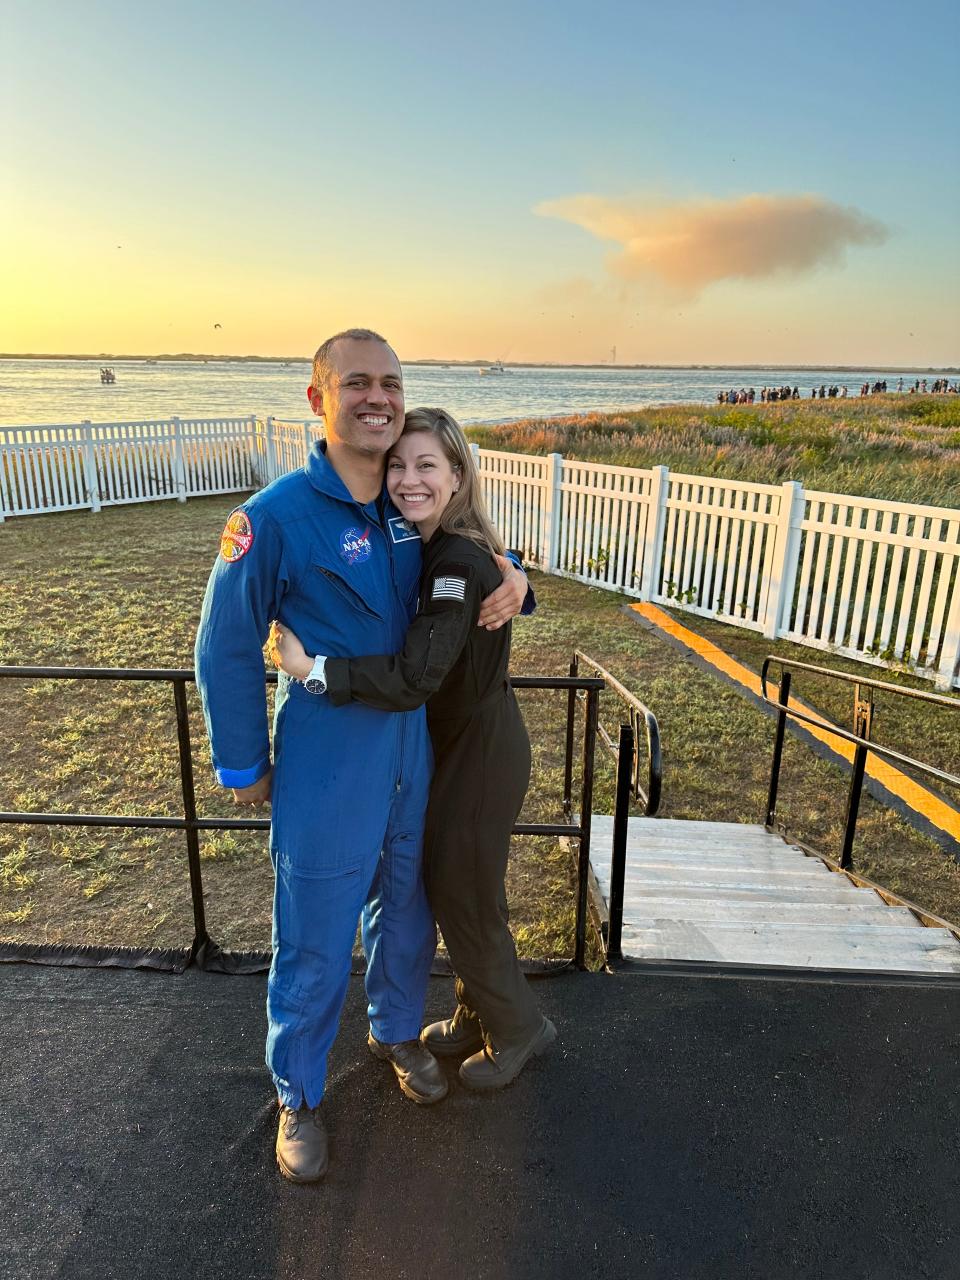 Anil and Anna Menon hugging on the beach in their respective NASA and SpaceX astronaut jumpsuits.